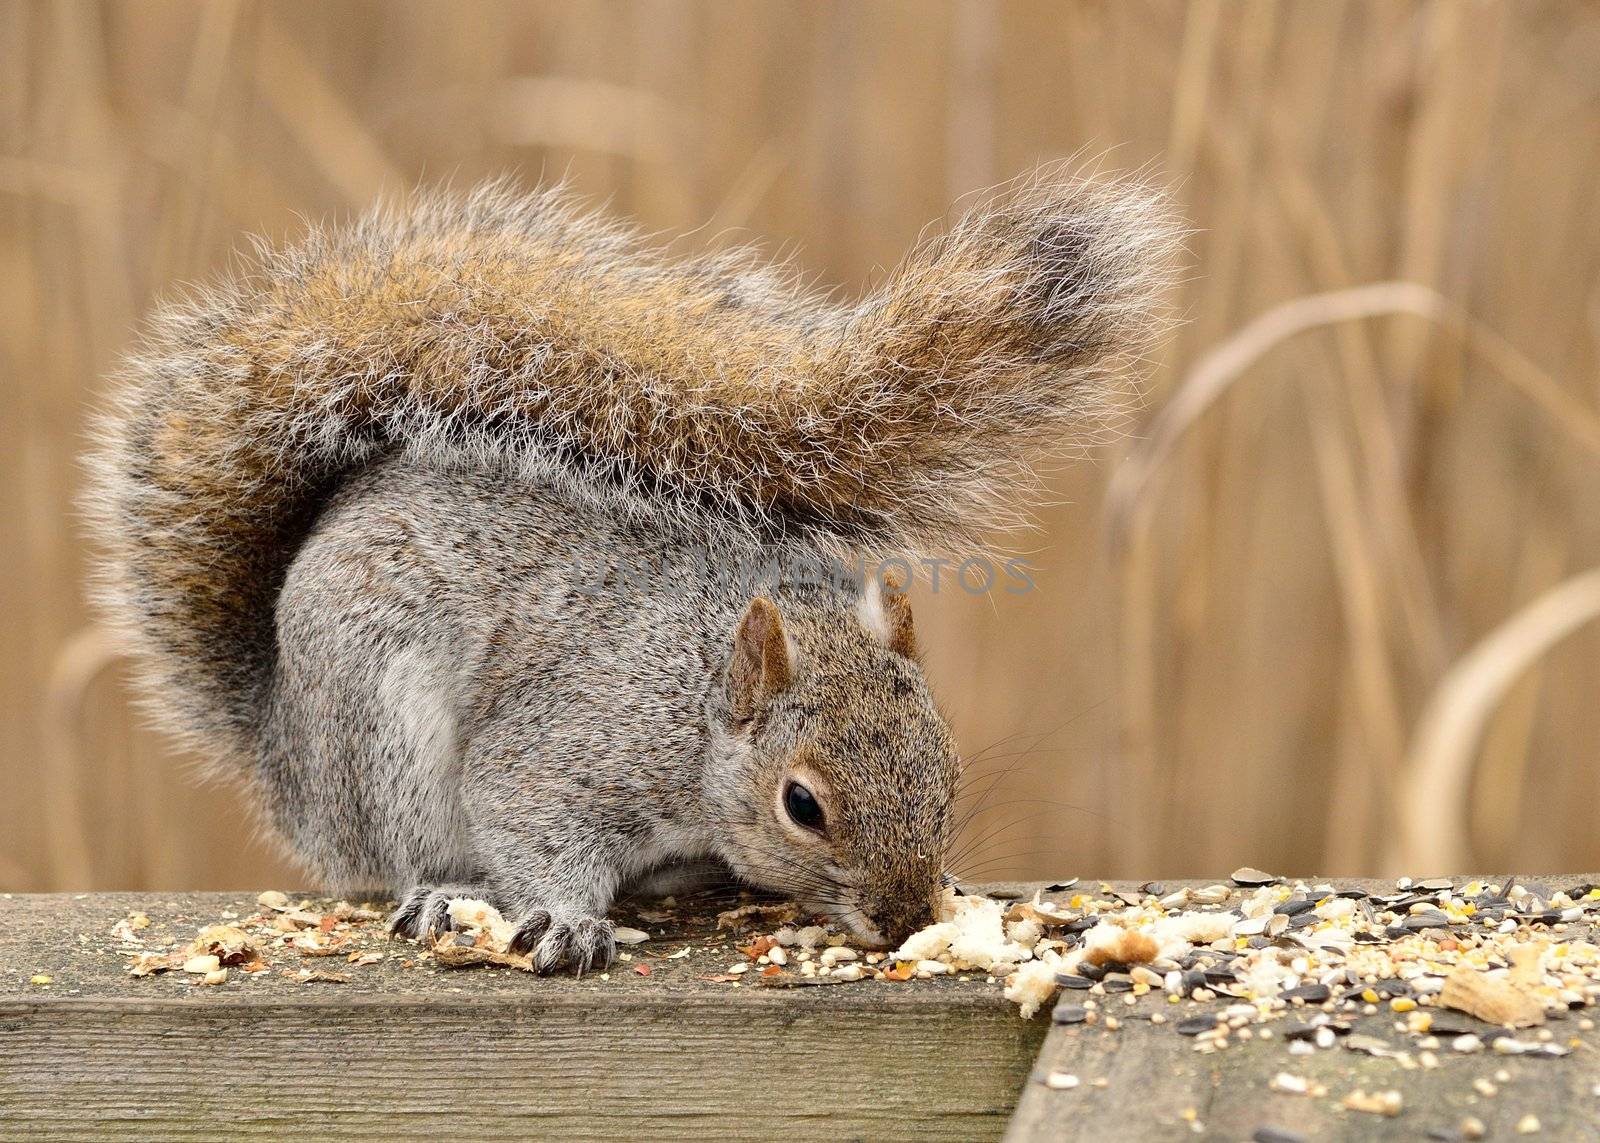 A Gray Squirrel perched on wood post.